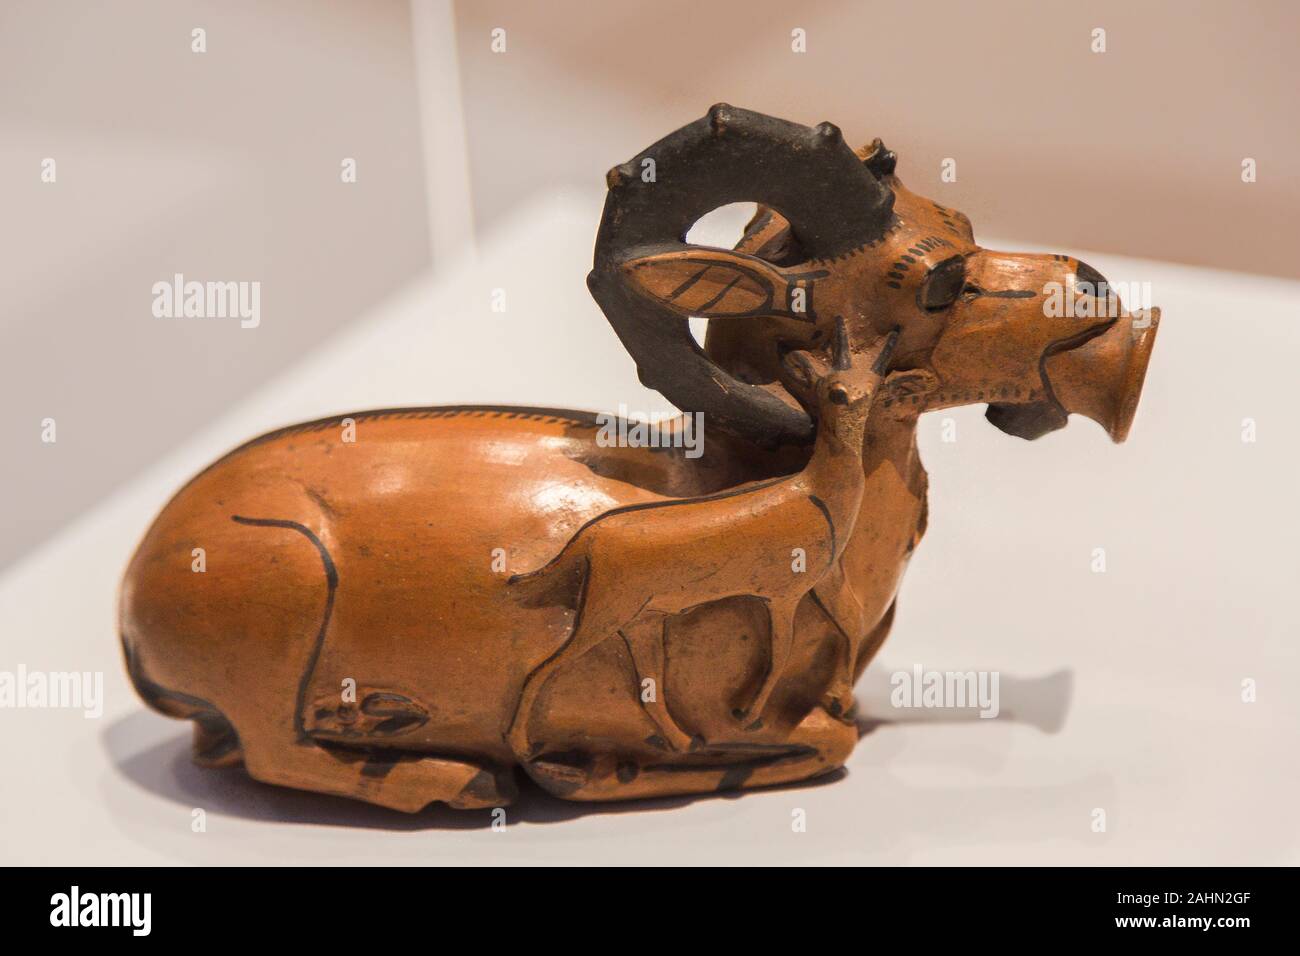 Exhibition 'The animal kingdom in Ancient Egypt', organized in 2015 by the Louvre Museum.  Vase in the form of an ibex, terracota, E 12659. Stock Photo